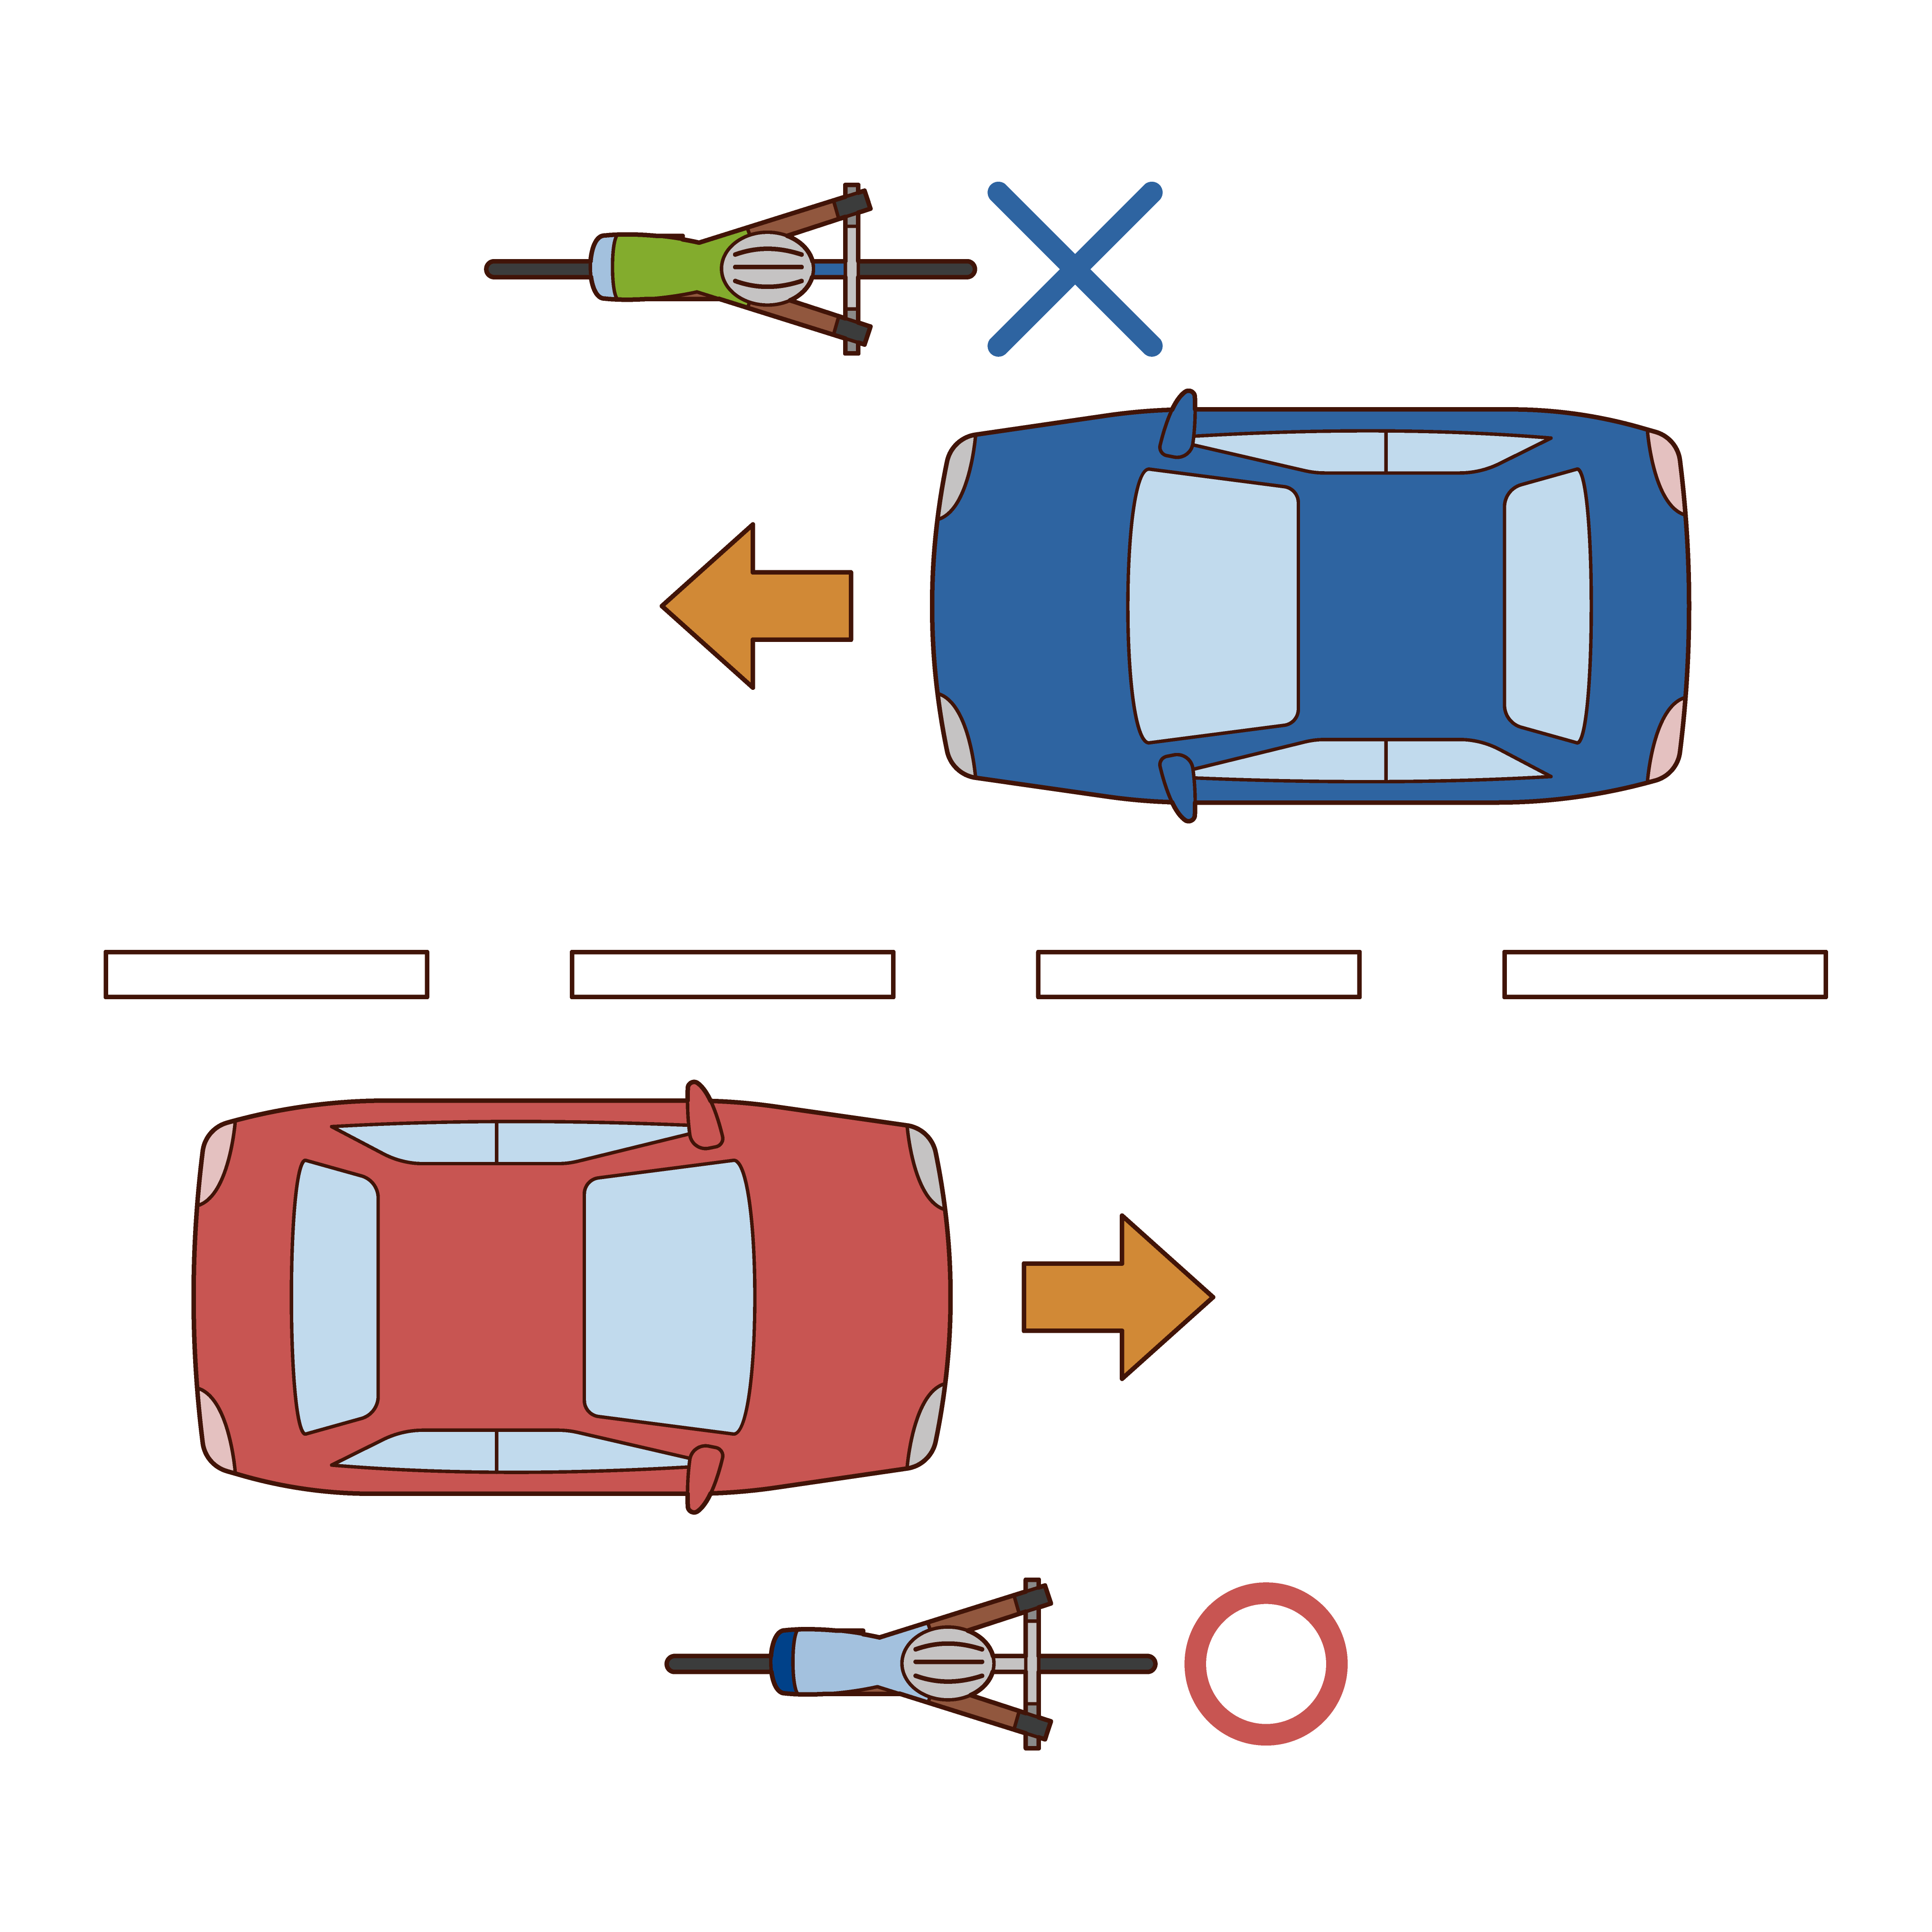 Illustration of rules for bicycles to run in the right lane